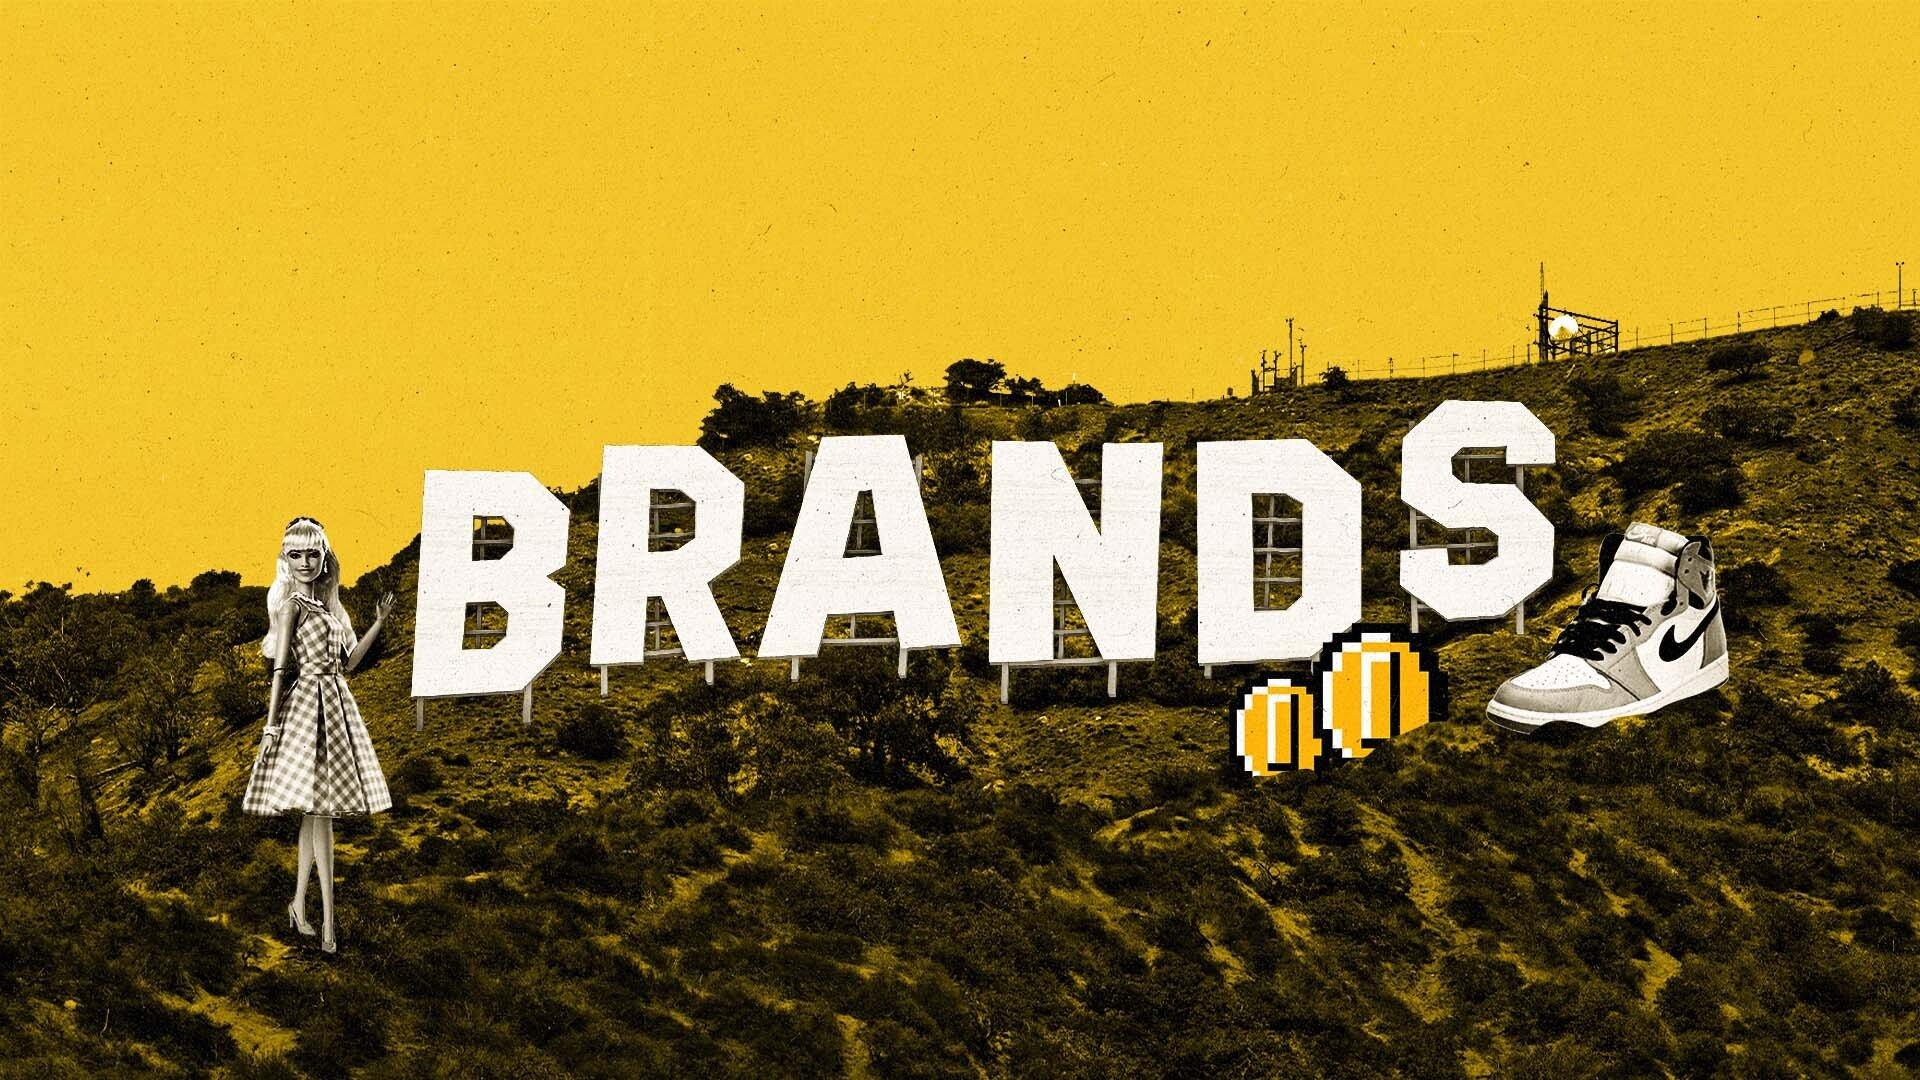 The word “Brands” is stylized like the Hollywood sign on a hillside, with a Barbie doll, Super Mario Bros coins, and an Air Jordan shoe scattered near the sign.